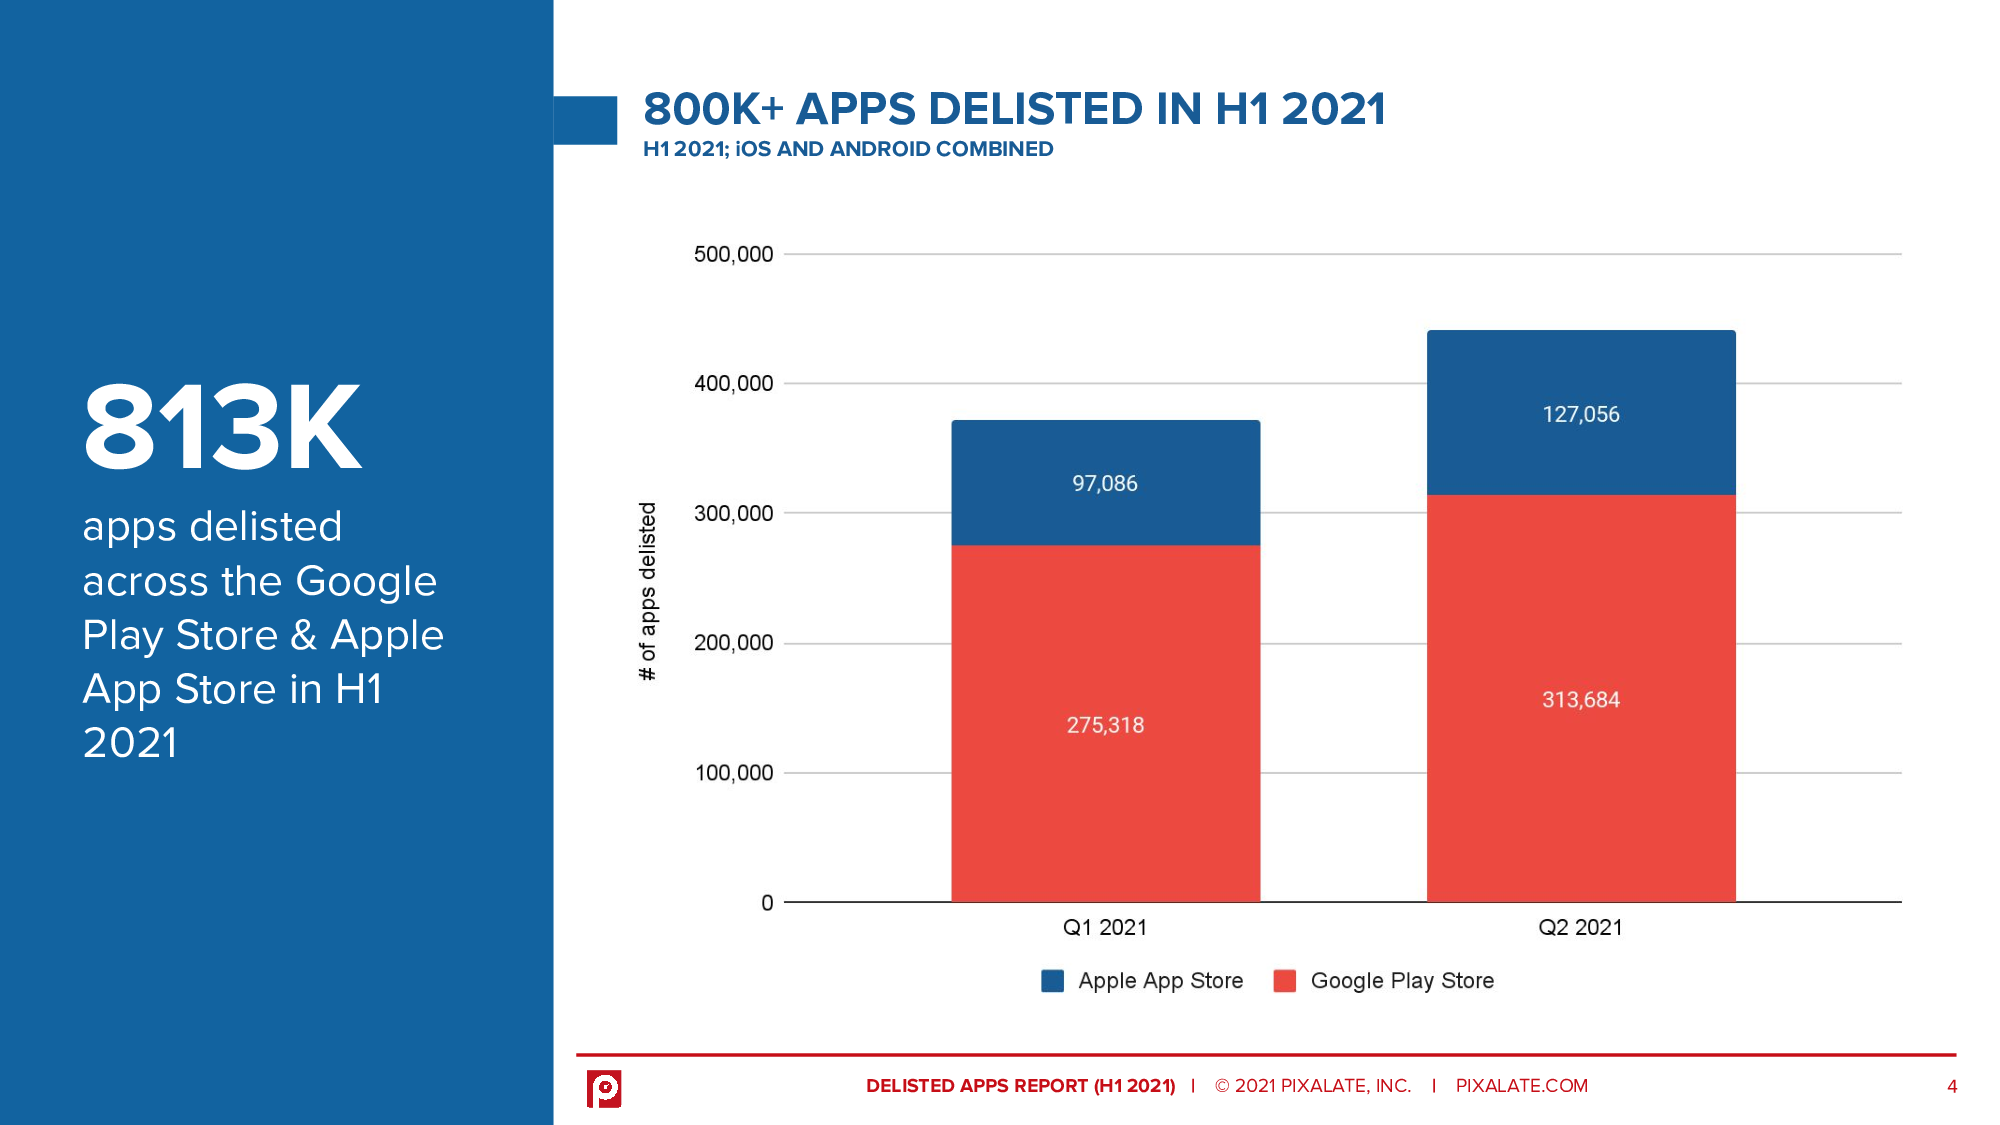 Over 813,000 app were delisted in H1 2021